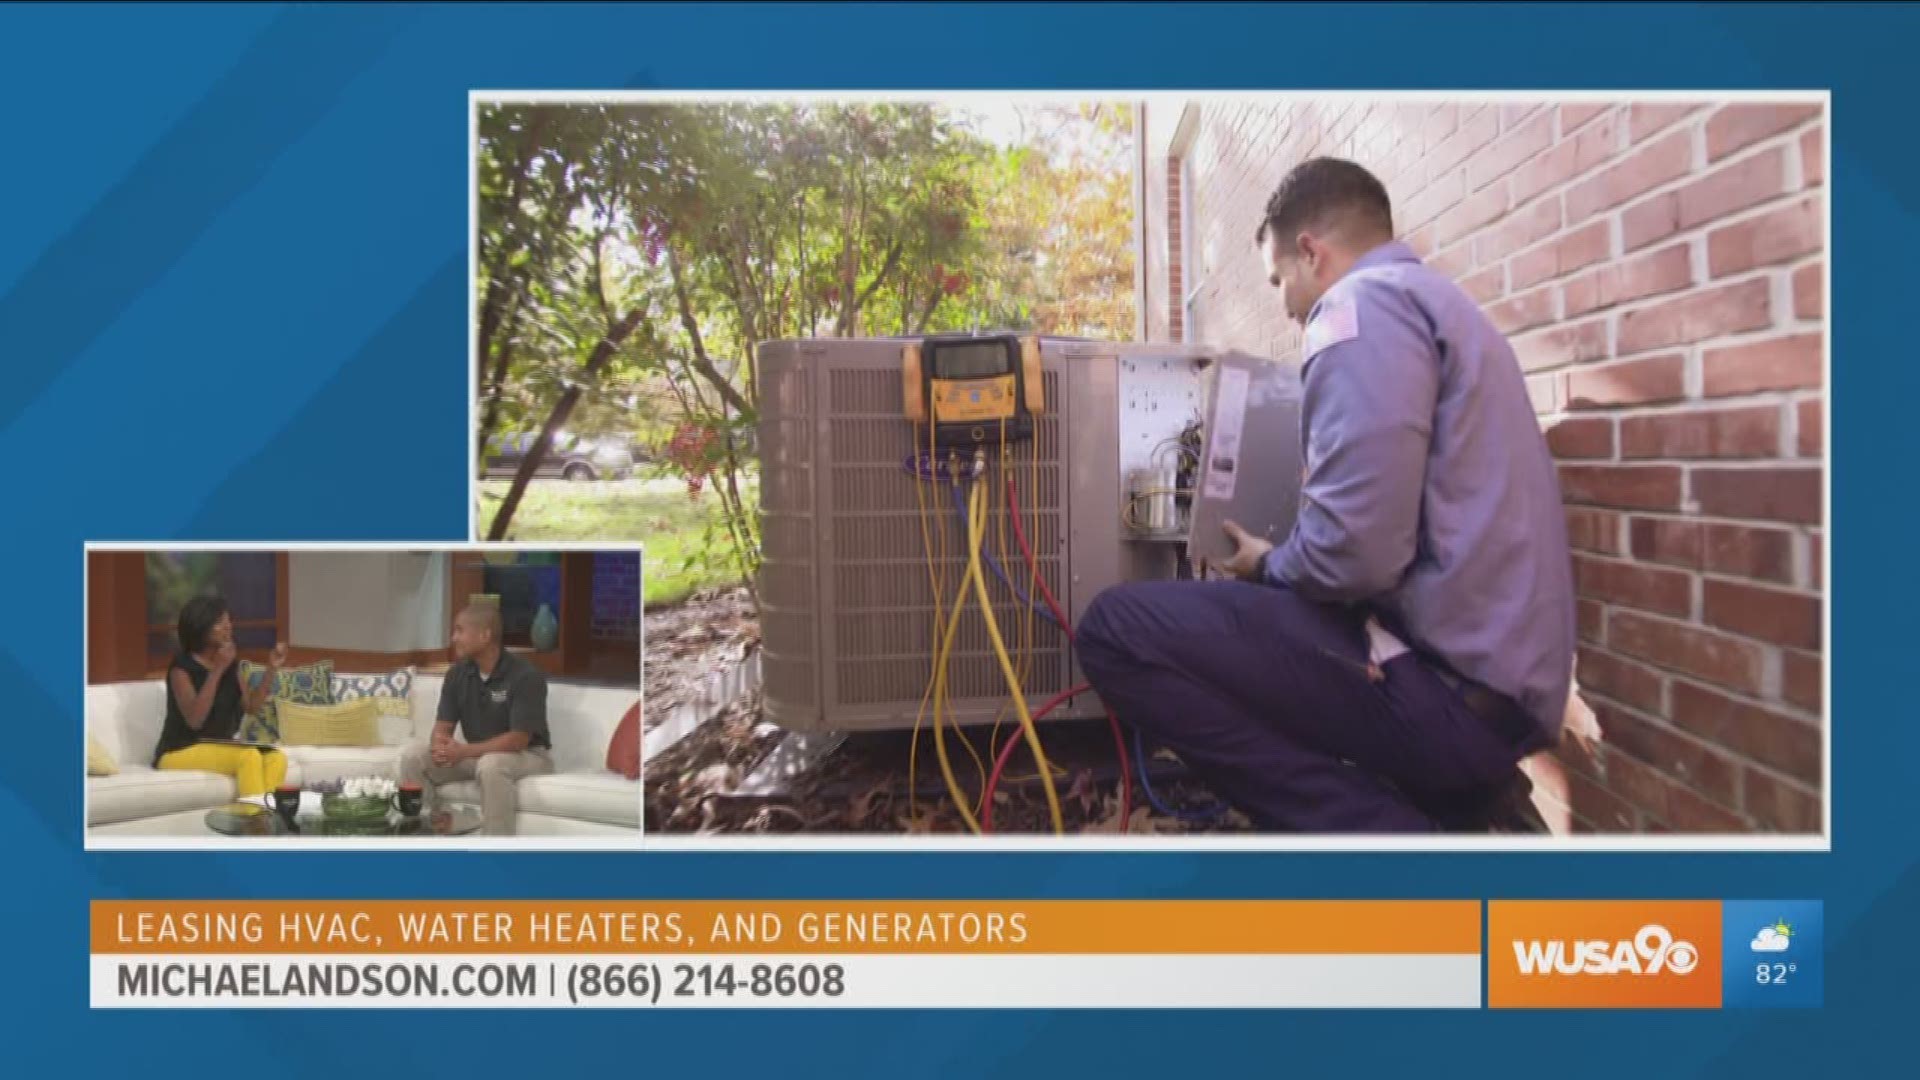 Brandon Viernes, master HVAC technician explains why you should lease an HVAC system, especially with the dangerous heat in the DC area this summer. To set up a consultation, call (866)-214-8606 or visit michaelandson.com.